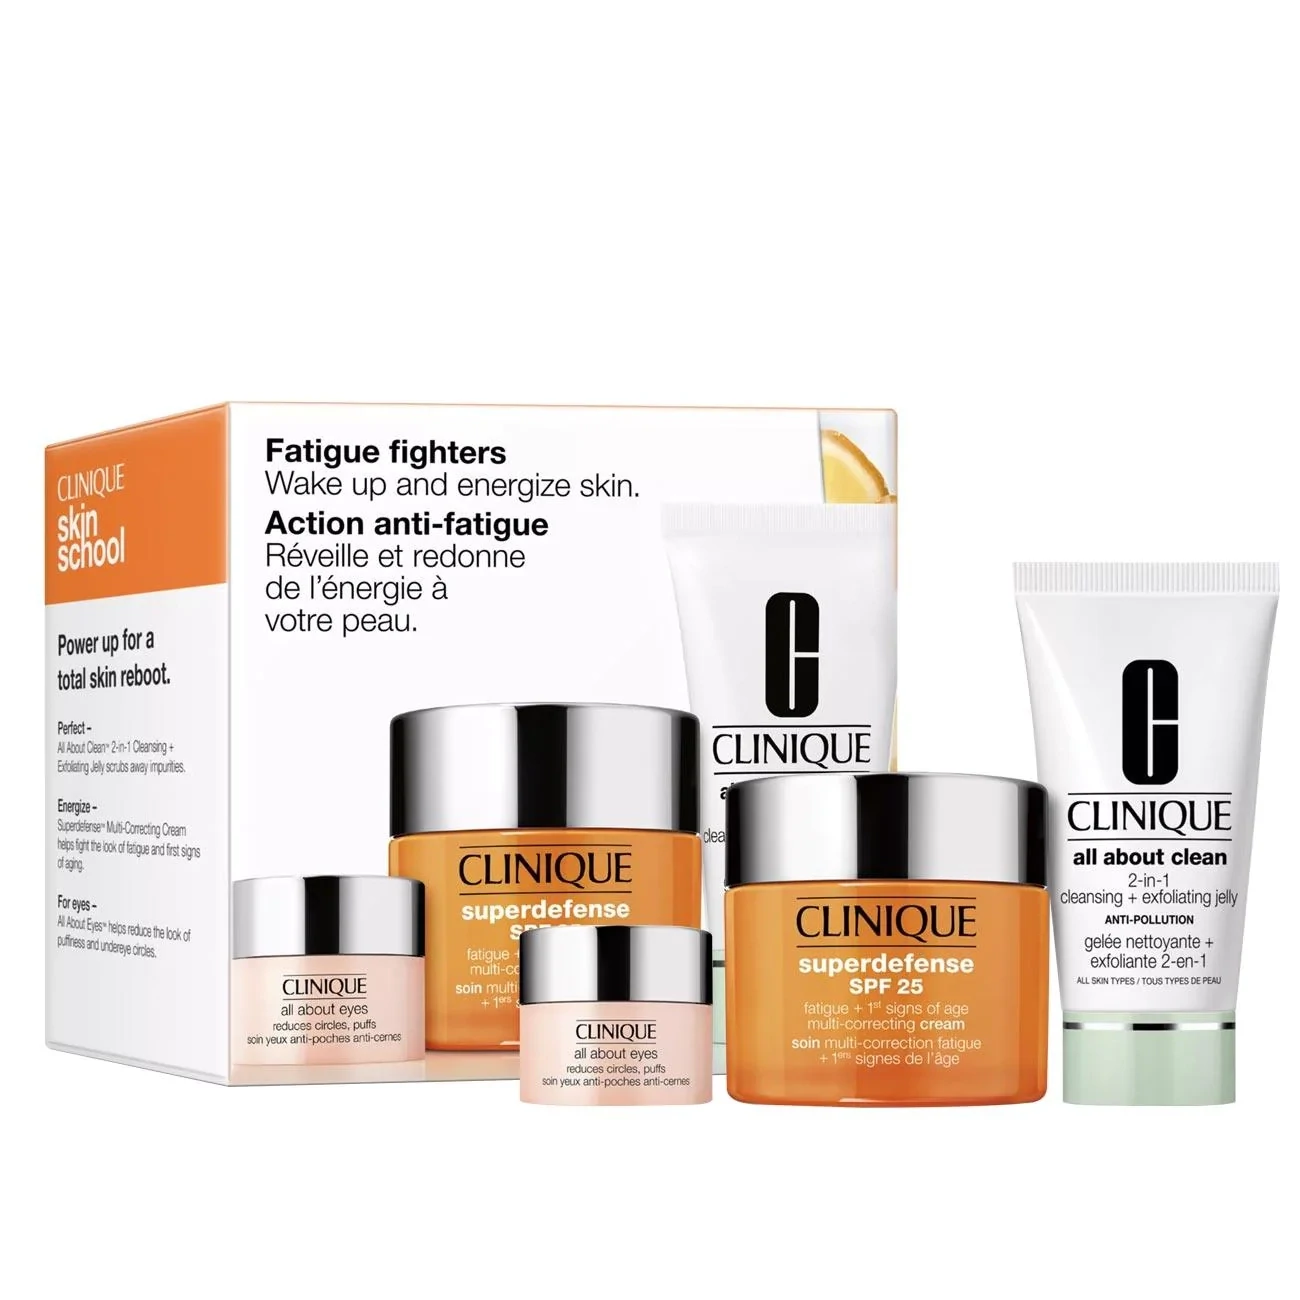 CLINIQUE - Fatigue Fighters: Wake Up And Energize Skin 